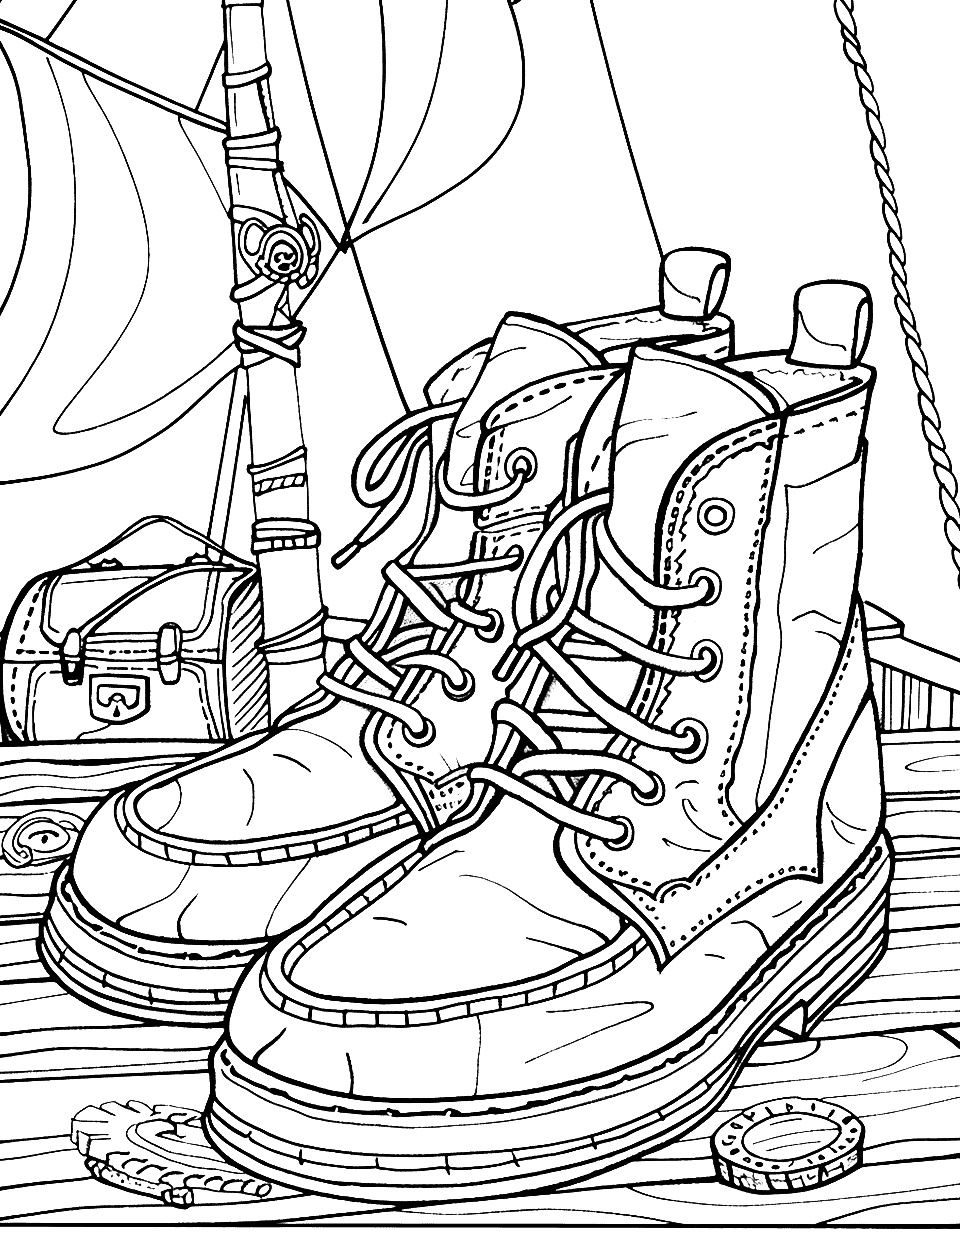 Pirate Boots on a Ship Deck Shoe Coloring Page - Buccaneer boots with a treasure chest in the background.